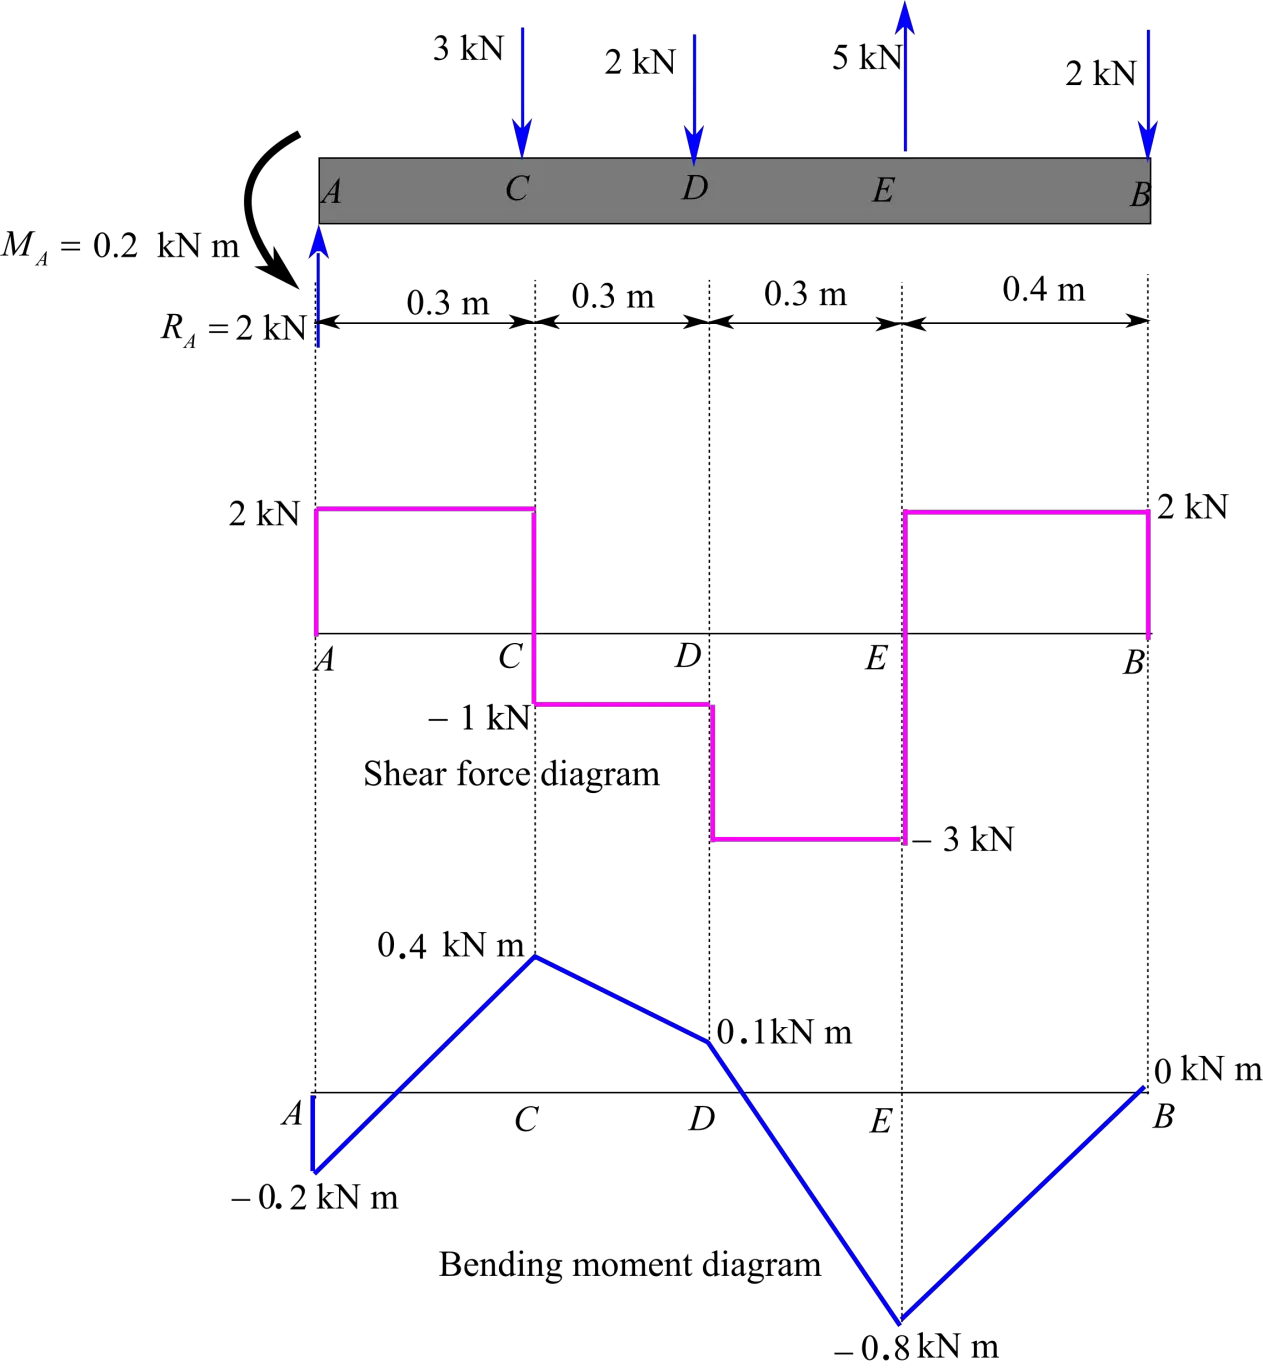 5.7 and 5.8 Draw the shear and bending-moment diagrams for the beam and loading shown, and determine the maximum absolute value (a) of the shear, (b) of the bending moment. And 5.10 Draw the shear and bending-moment diagrams for the beam and loading shown, and determine the maximum absolute value (a) of the shear, (b) of the bending moment.